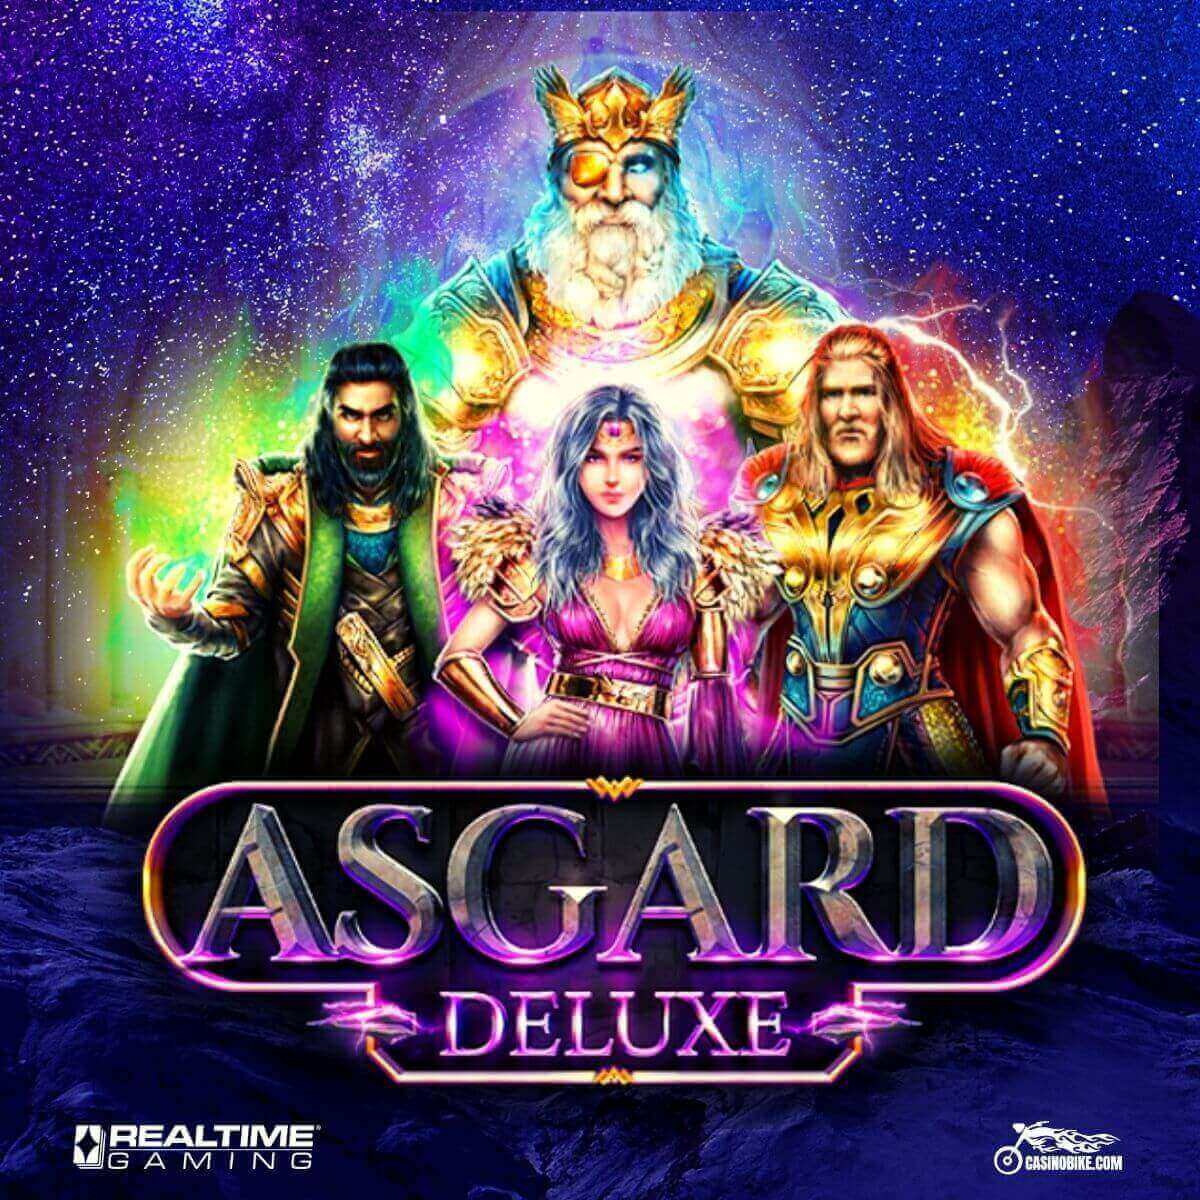 Asgard Deluxe Slot by Real Time Gaming